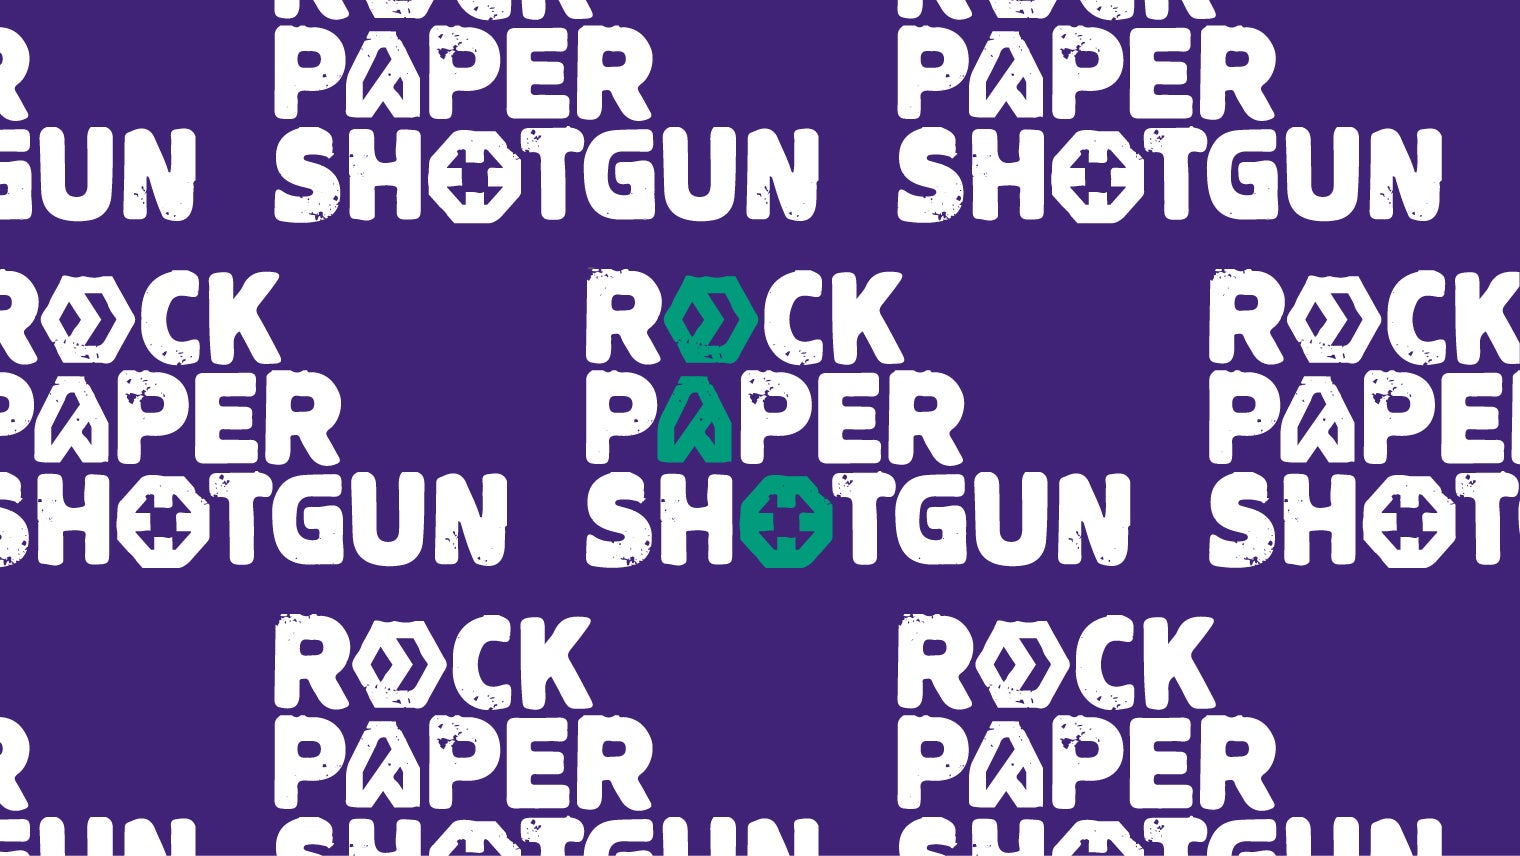 Image for Welcome to the new Rock Paper Shotgun